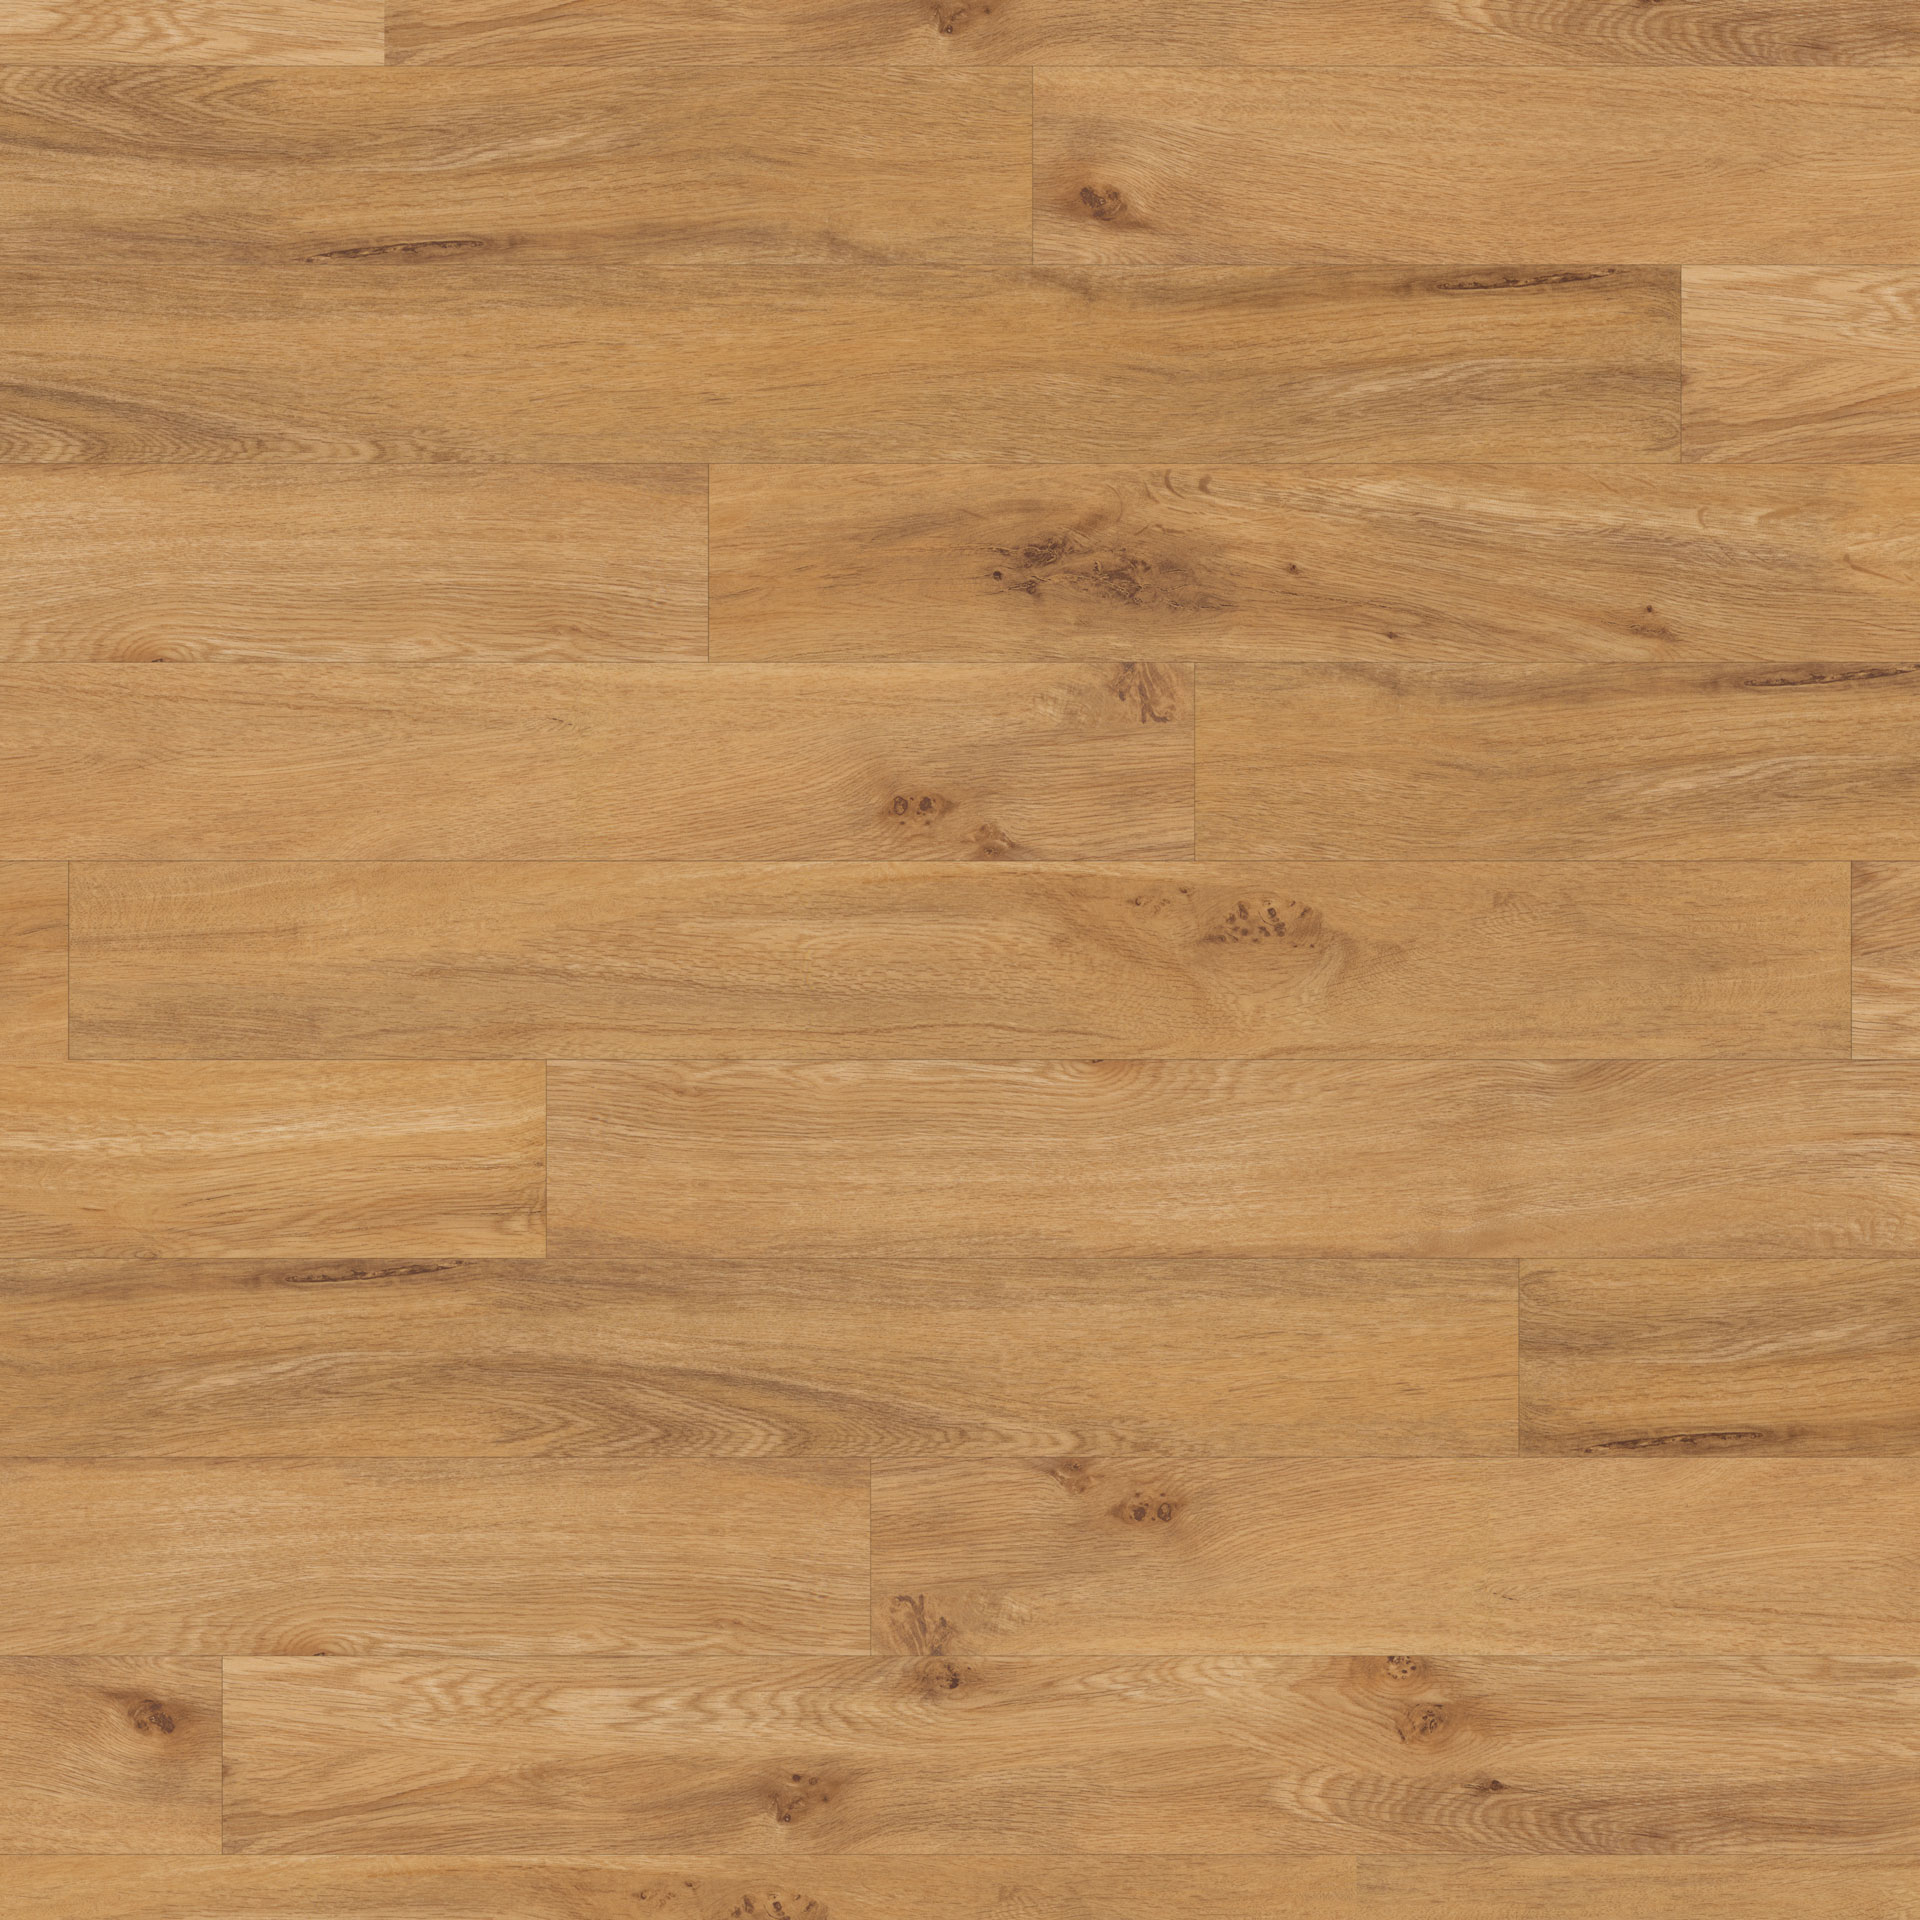 krp-img/Images/Products/Swatches/Product%20Listing%20Images/Product%20Overheads/Rubens/KP39-Warm-Oak_OH.jpg